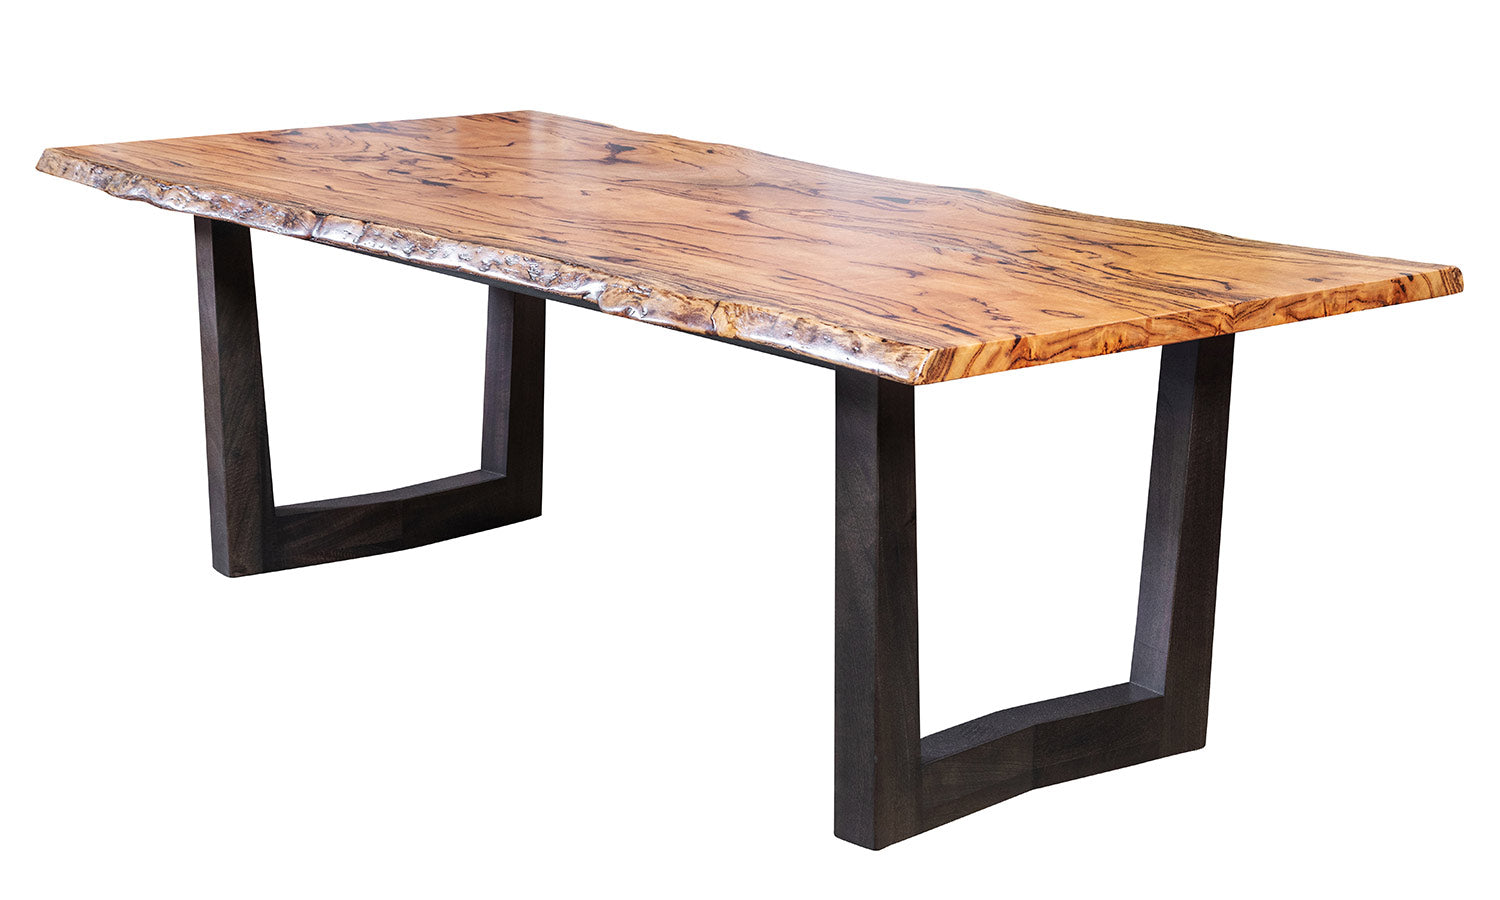 Gathwood Original Marri Timber Slab Natural Edge Dining Table Made in Perth WA Dark Stained Timber Base